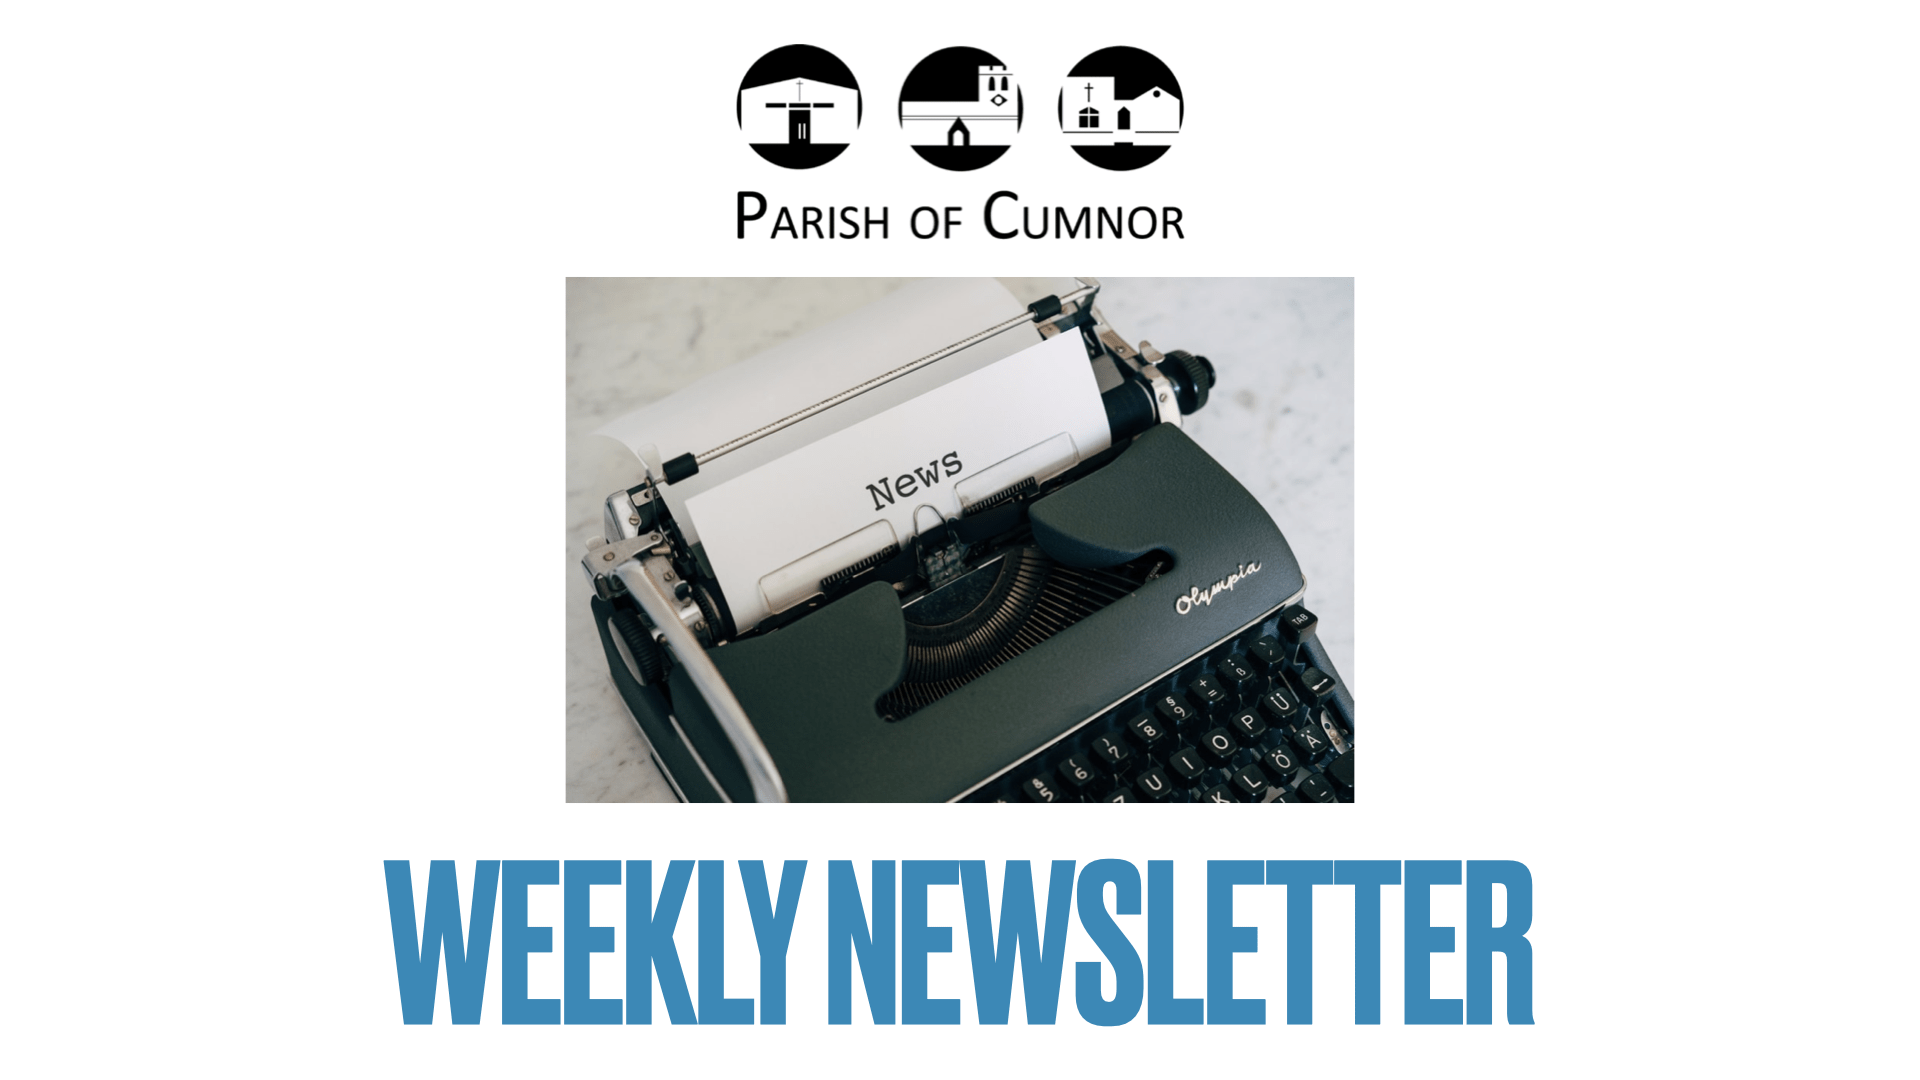 Newsletter for Sunday 21st March 2021